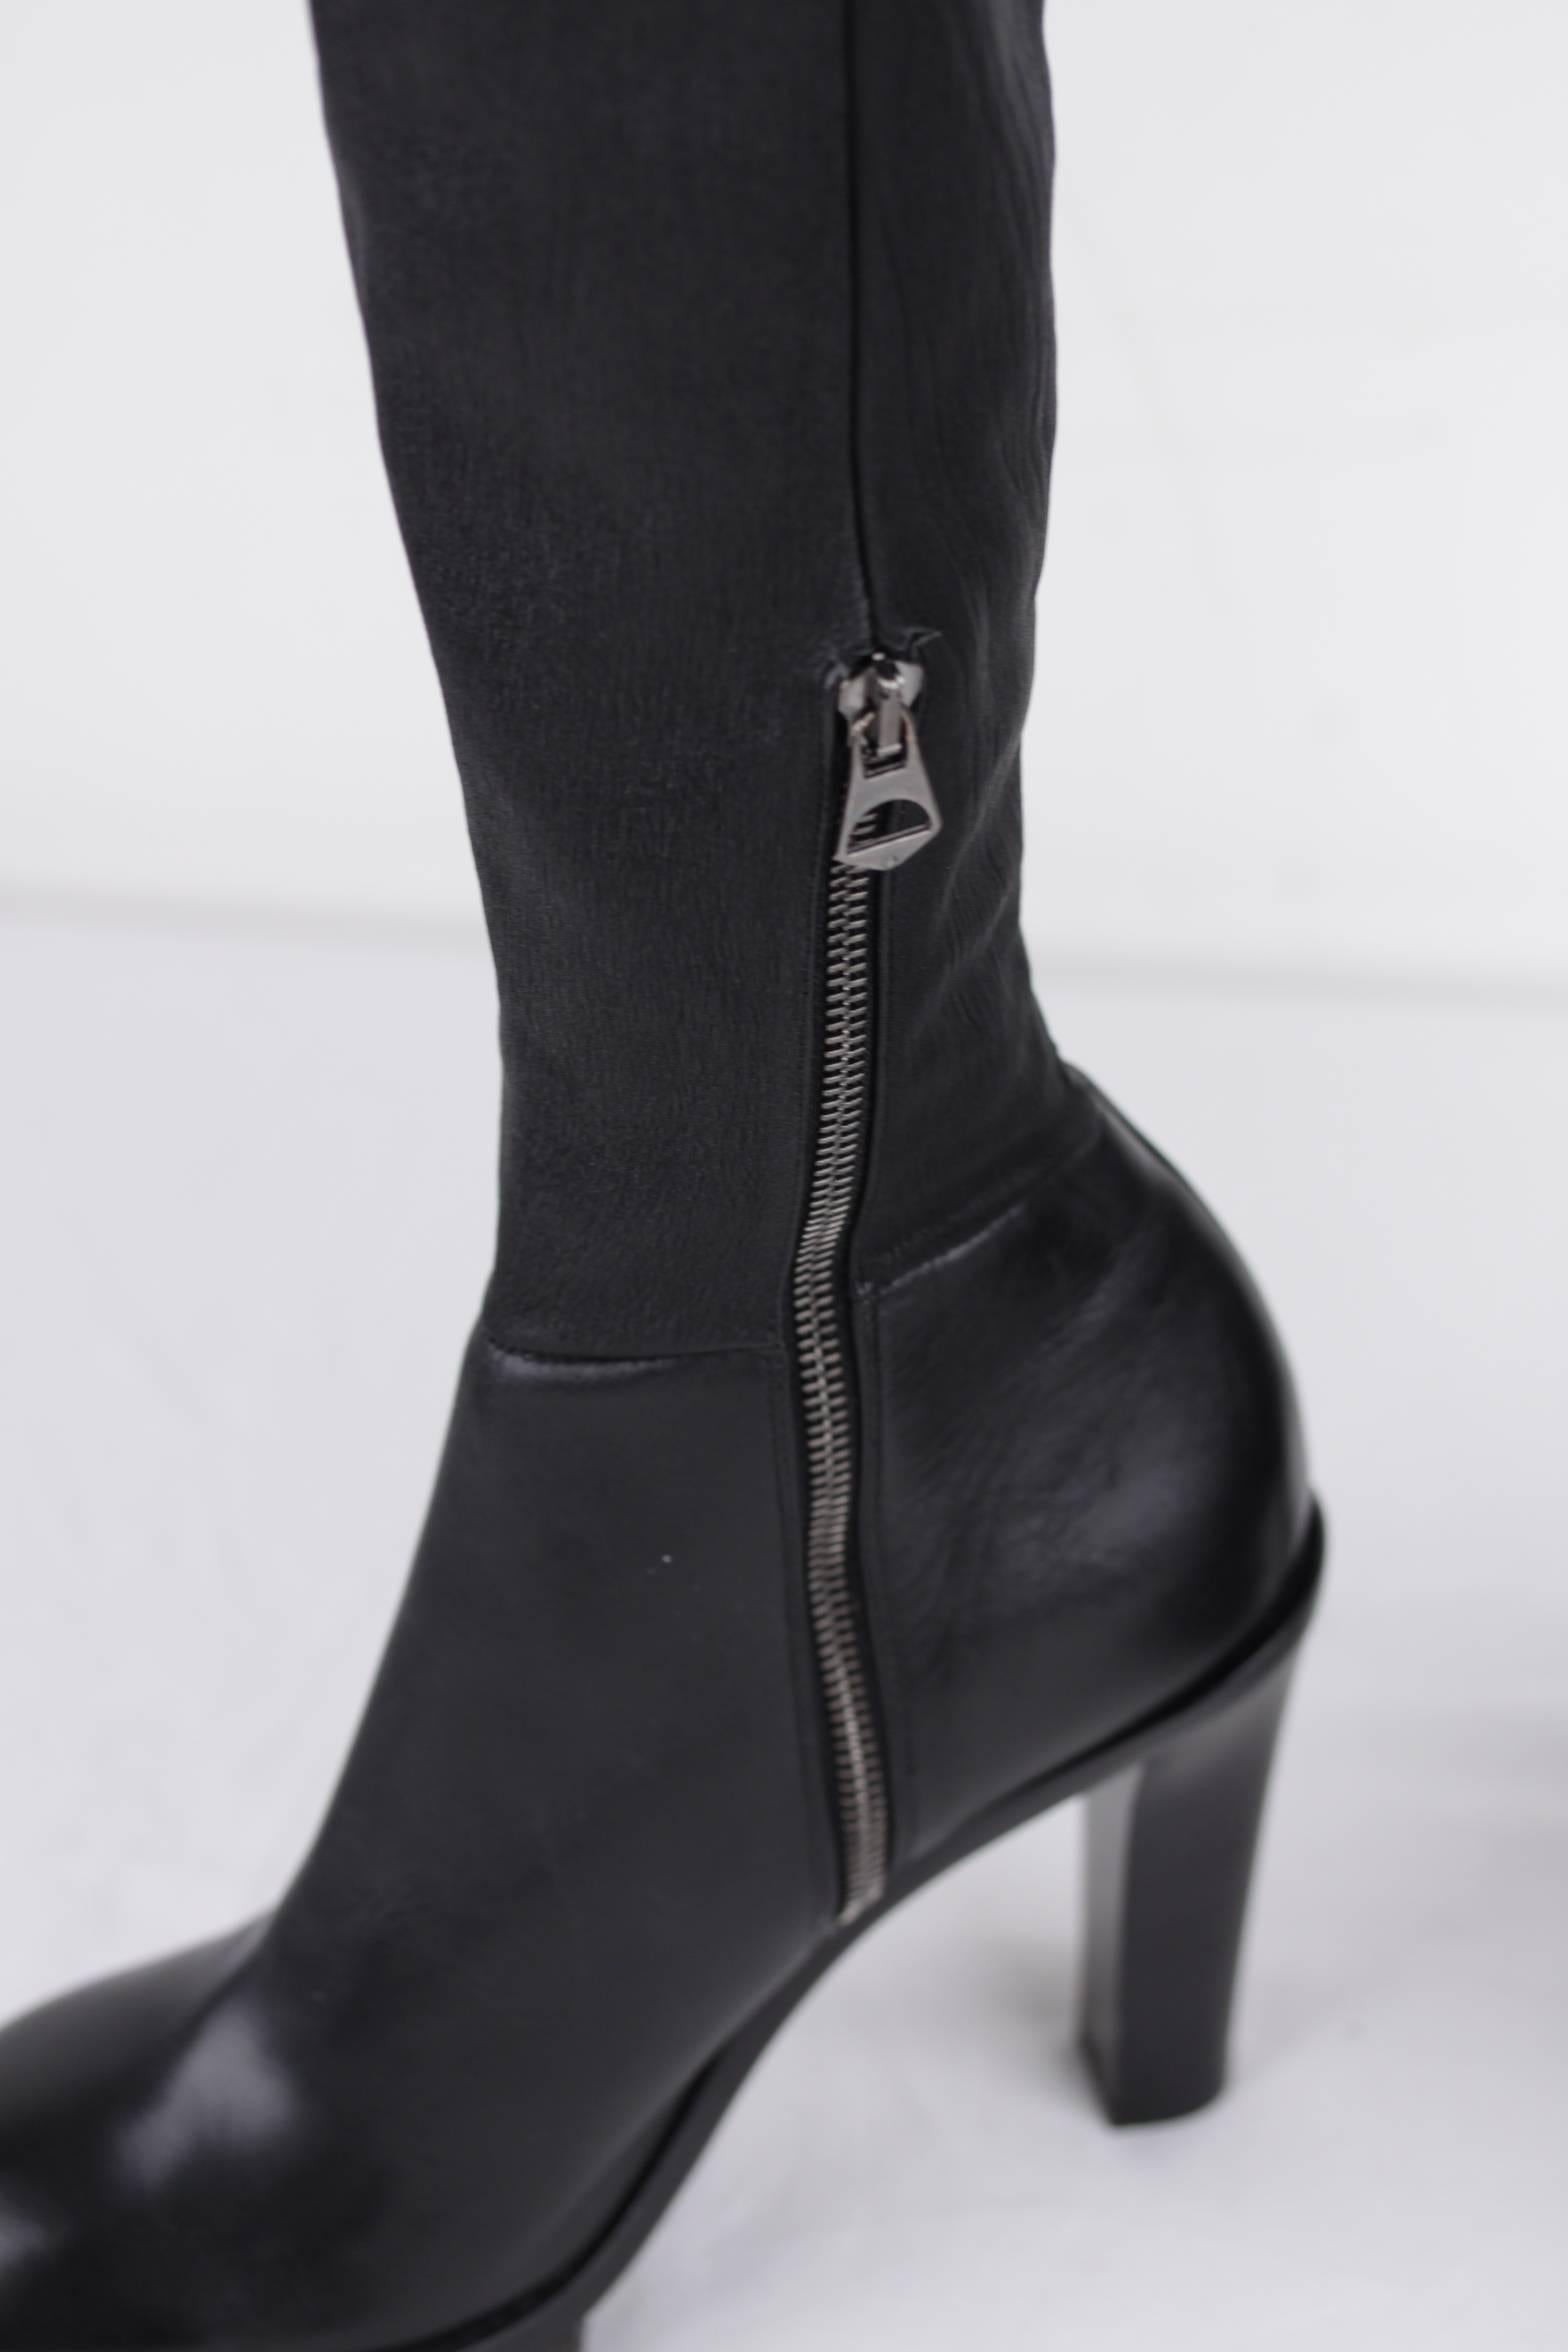 ACNE STUDIOS Black Leather REVERY Heeled OVER THE KNEE BOOTS Sz 38  In Excellent Condition In Rome, Rome